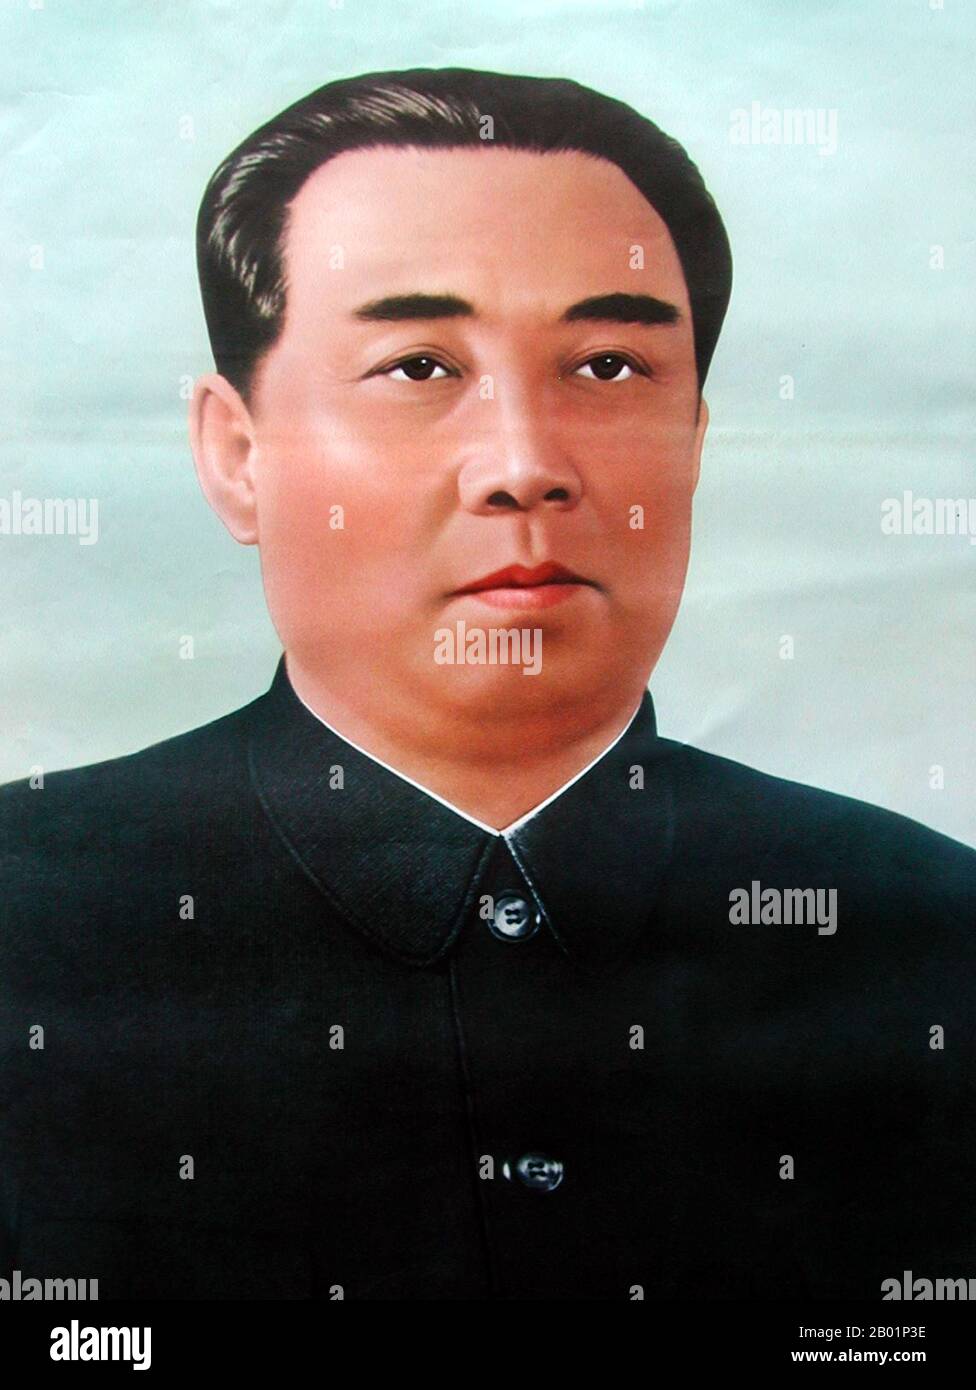 Korea: North Korean leader Kim Il Sung (15 April 1912 - 8 July 1994), supreme ruler of the Democratic People's Republic of Korea (DPRK). Official portrait,  c. 1970.  Kim Il-sung was a Korean communist politician who ruled North Korea, officially the Democratic People's Republic of Korea, from its establishment in 1948 until his death in 1994. He held the posts of Prime Minister from 1948 to 1972 and President from 1972 to his death. He was also the leader of the Workers' Party of Korea from 1949 to 1994 (titled as chairman from 1949 to 1966 and as general secretary after 1966). Stock Photo